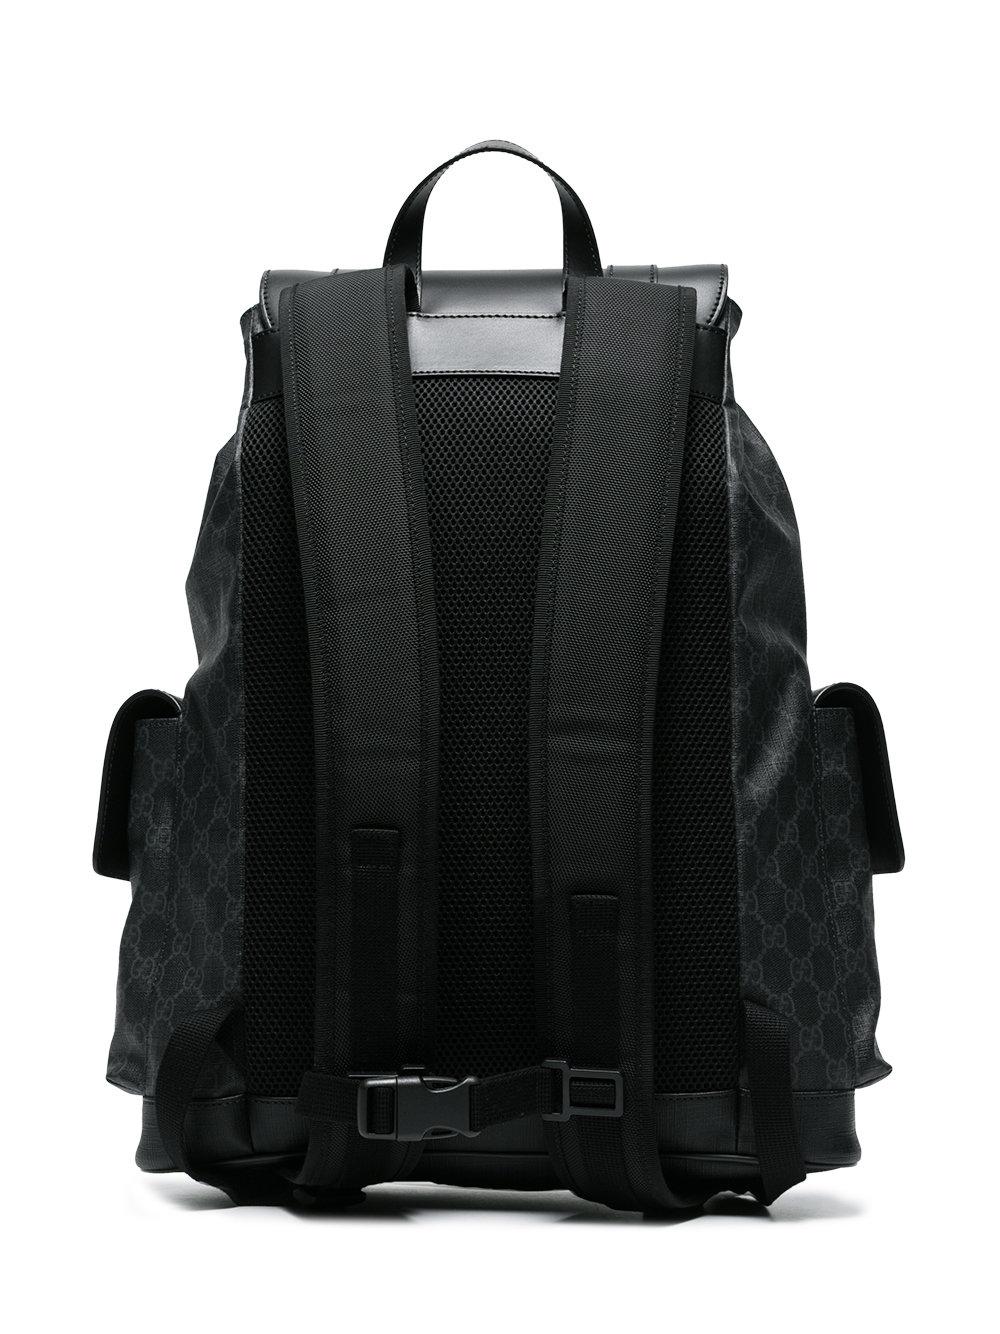 Gucci Leather Stripe GG Supreme Backpack in Black for Men - Lyst